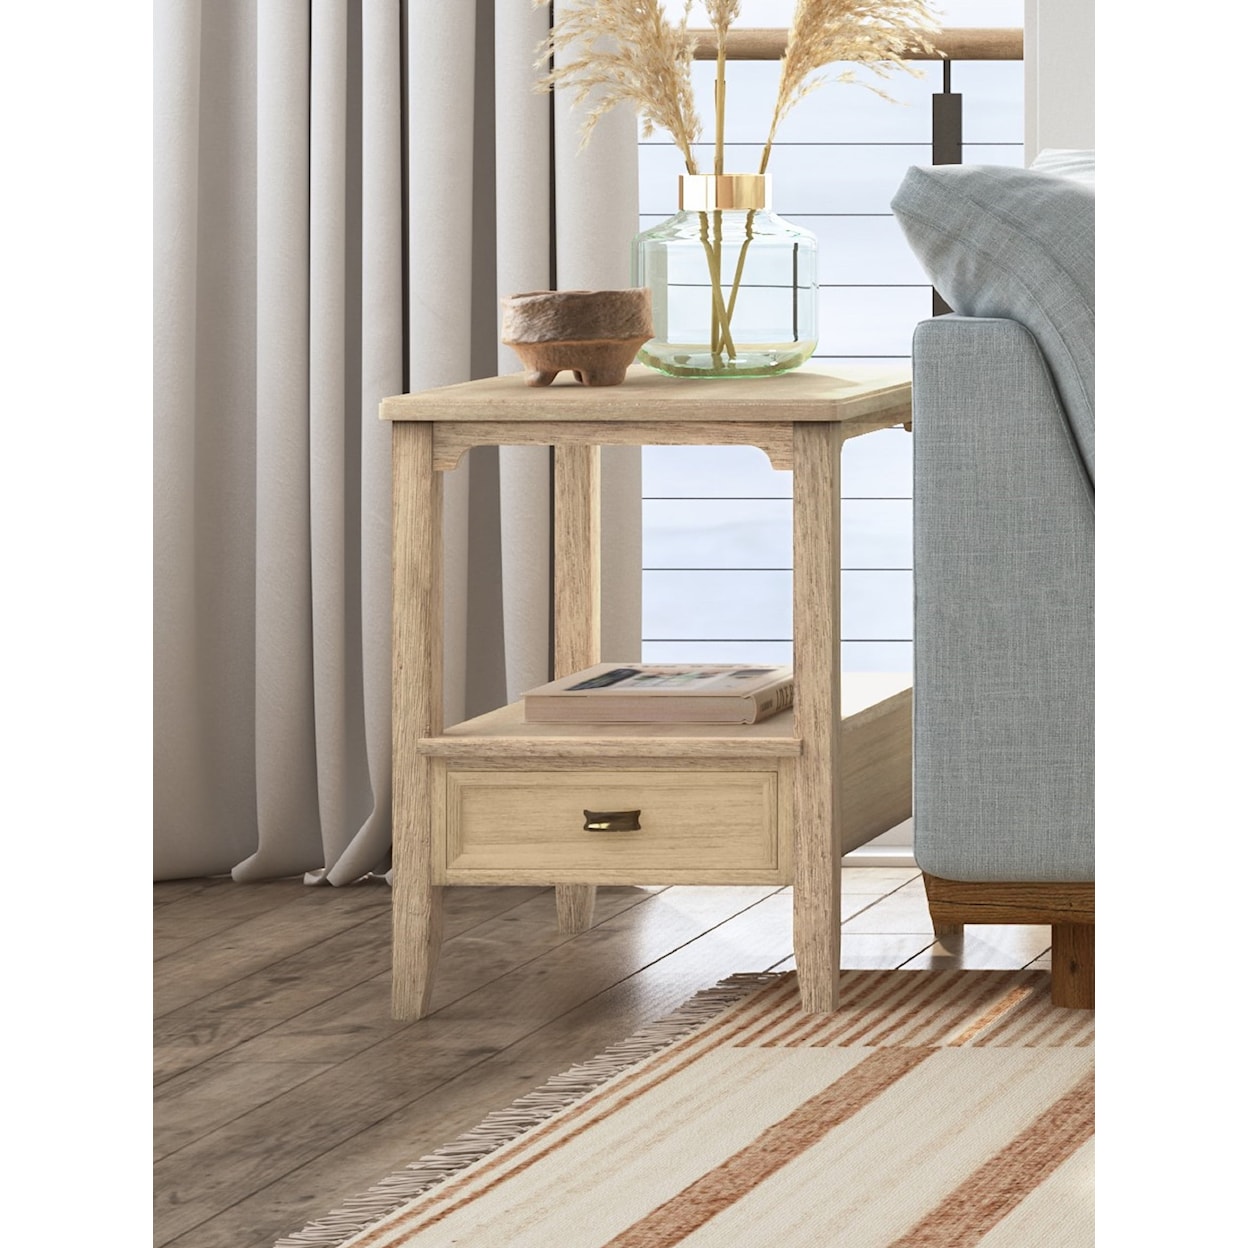 Null Furniture Chatham End Table with Low Shelf